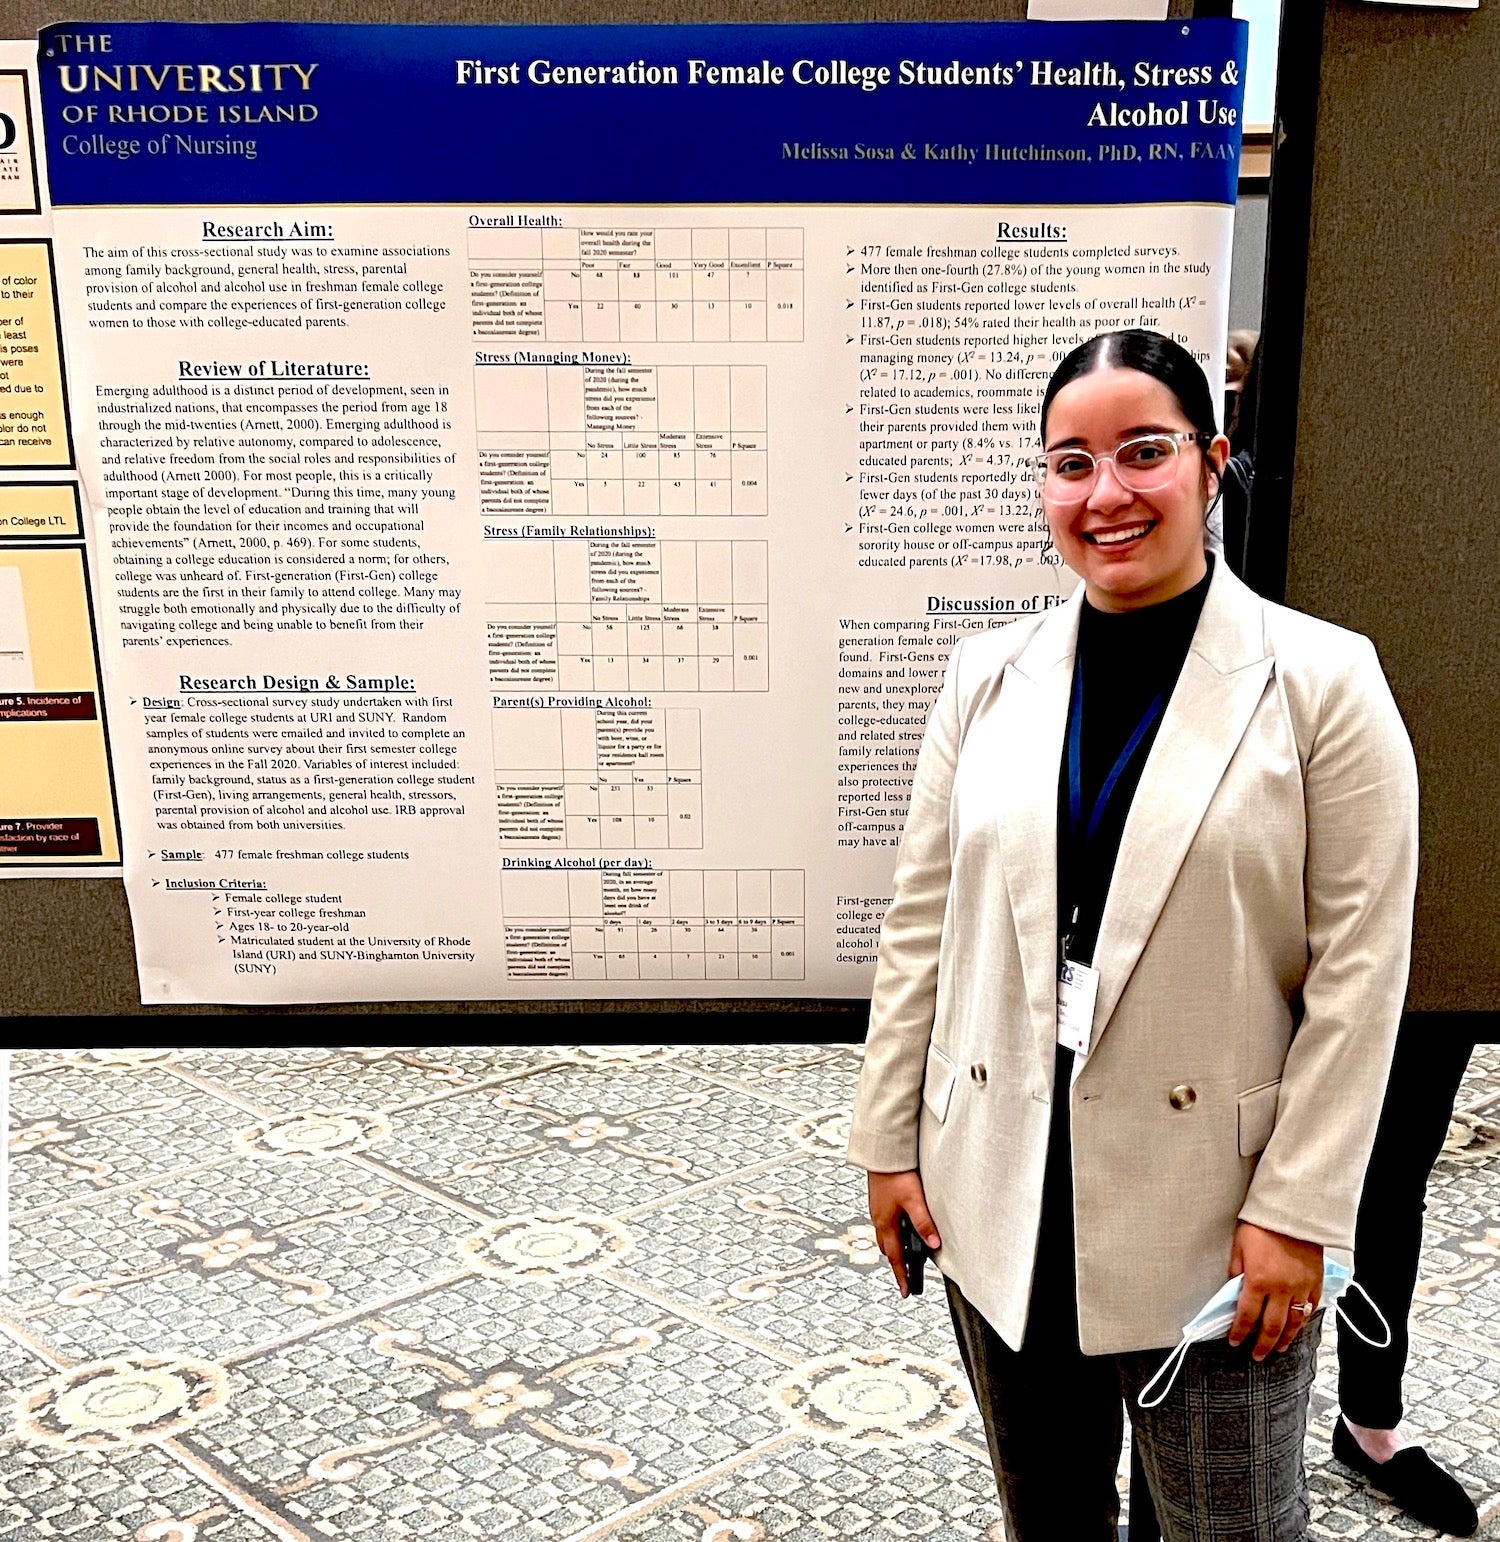 College of Nursing graduate Melissa Sosa presented her research at the Eastern Nursing Research Society's annual meeting in March.